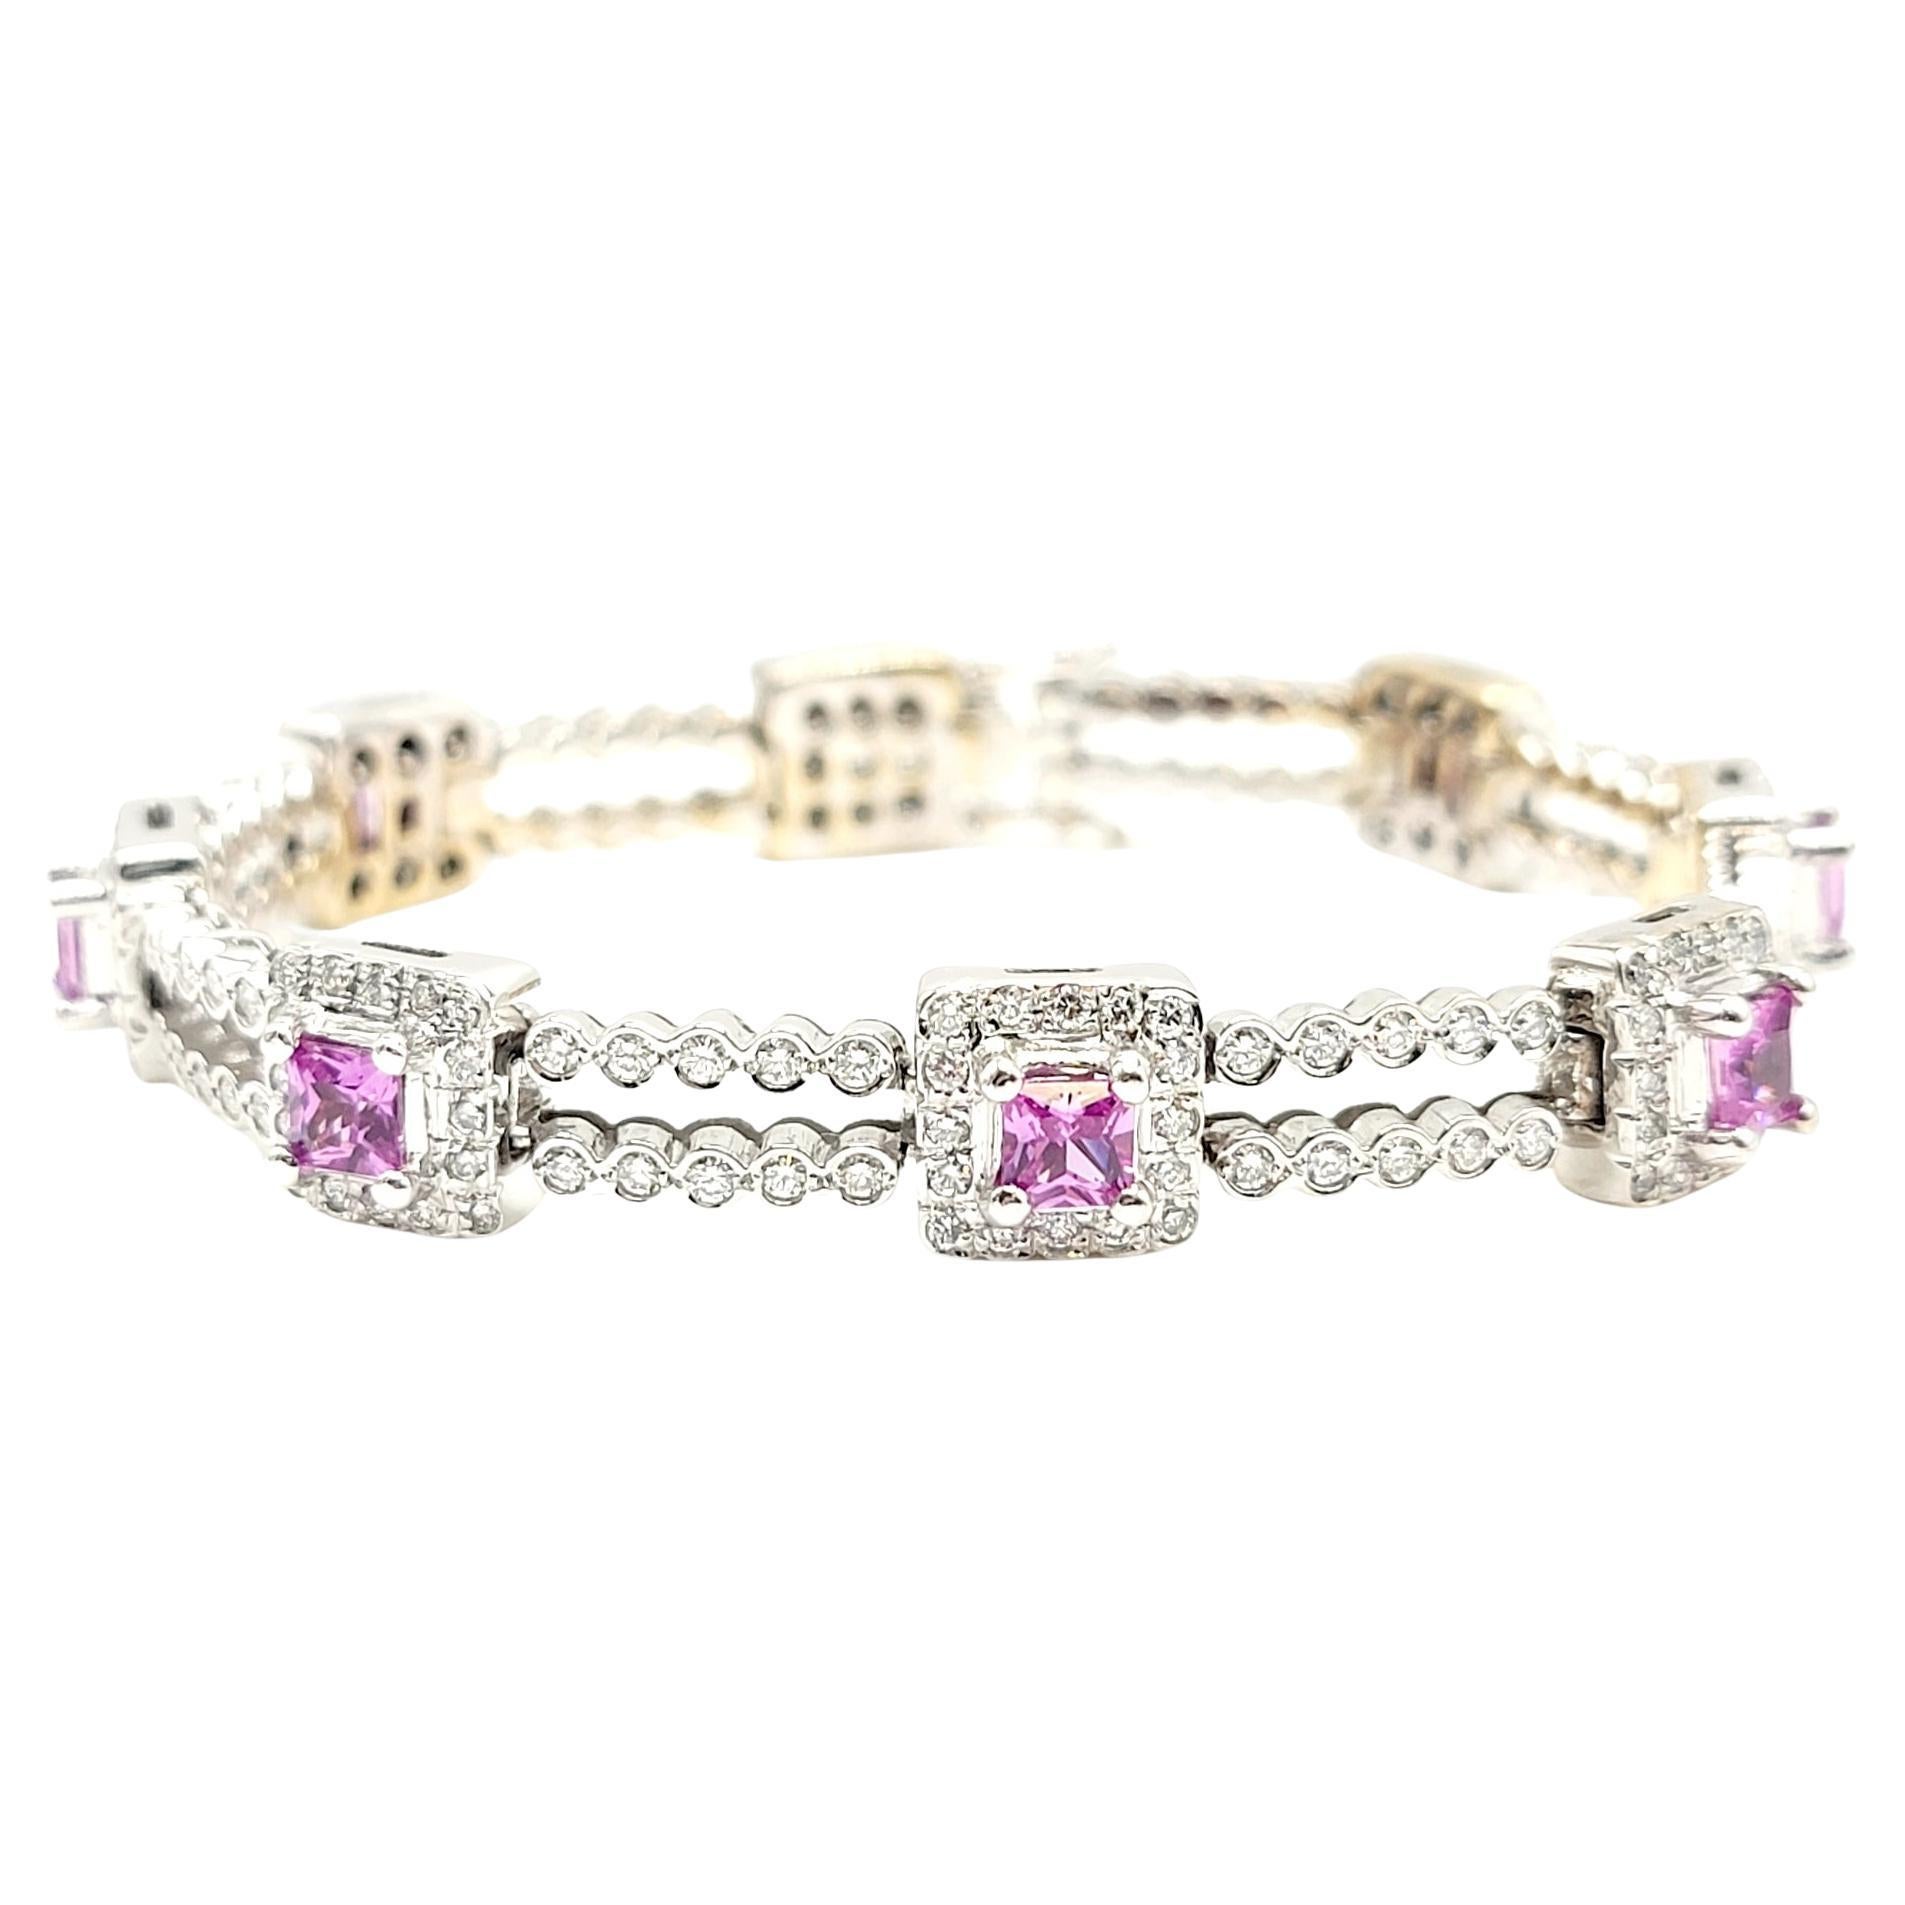 This stunning 5.72 carats total diamond and sapphire station bracelet will sparkle on your wrist and add that bright pink pop of color you've been looking for. 

Two rows of bezel set round brilliant cut diamonds link eight princess cut natural pink